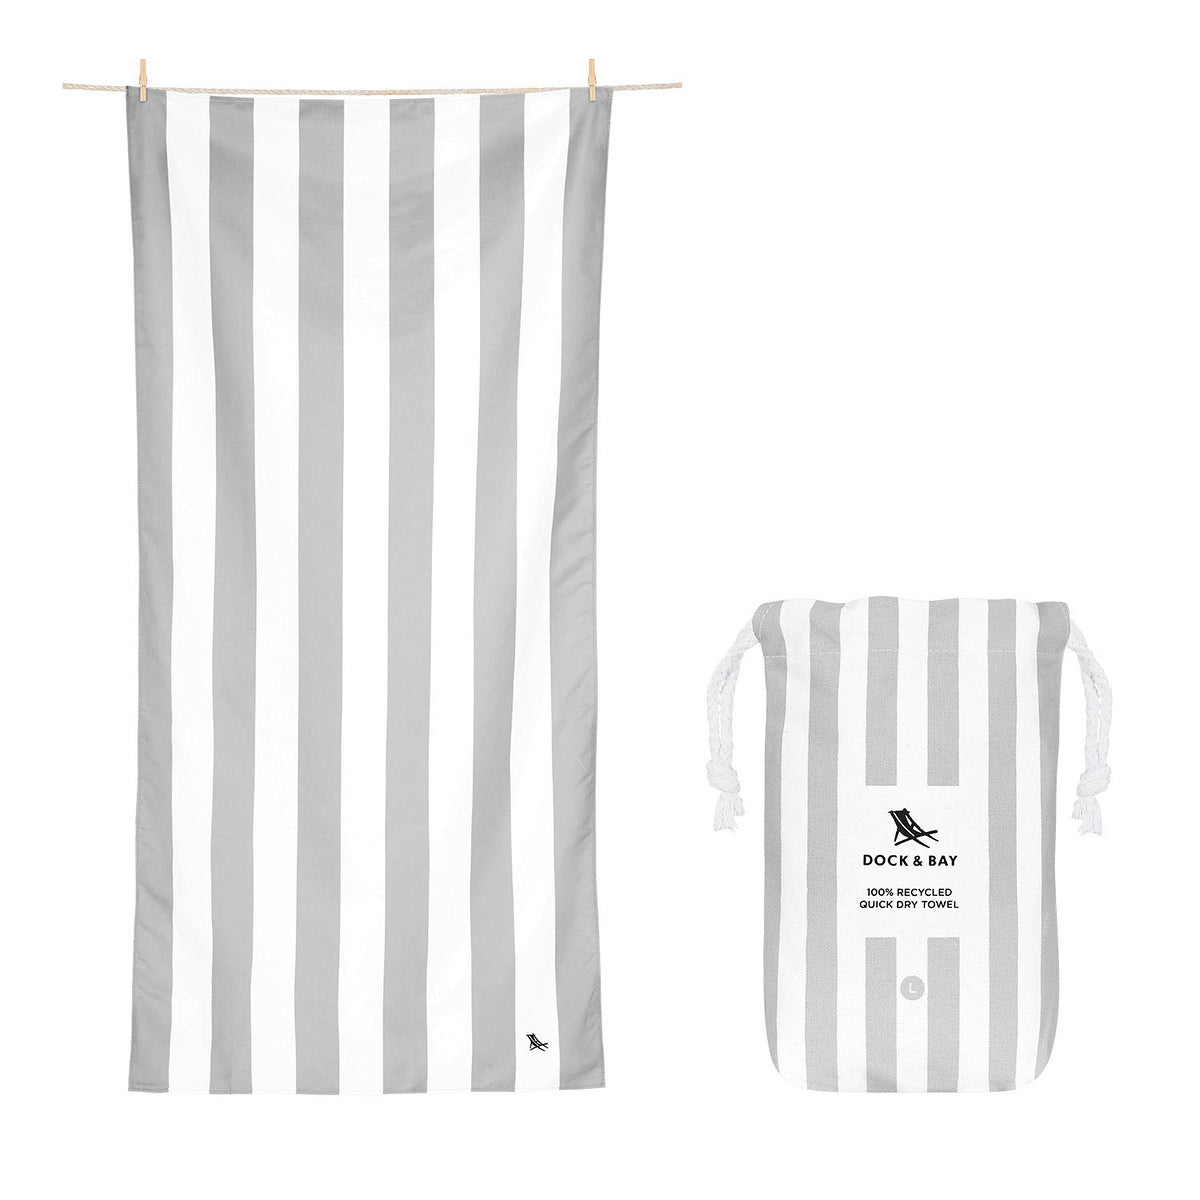 grey and white striped cabana towel from dock and bay